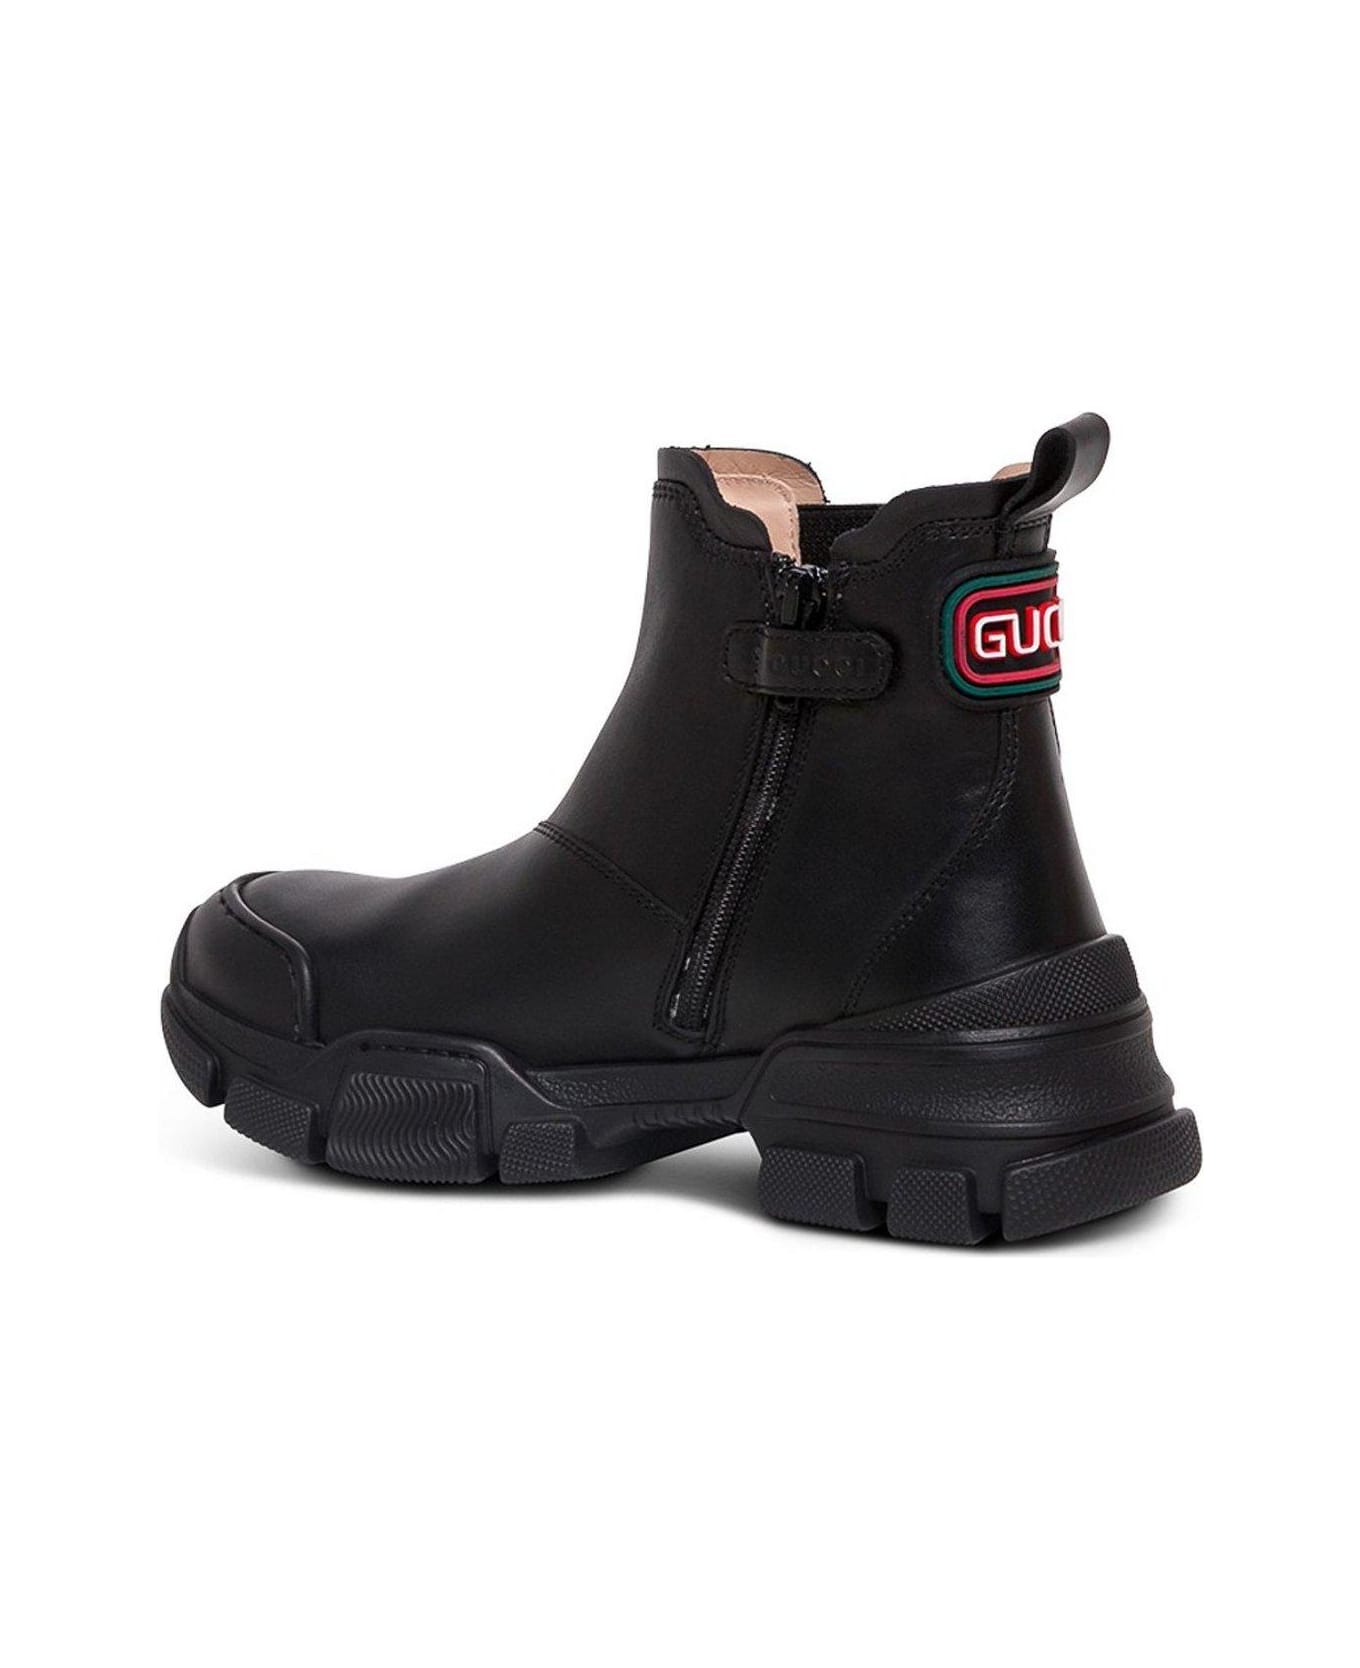 Gucci Logo Patched Boots